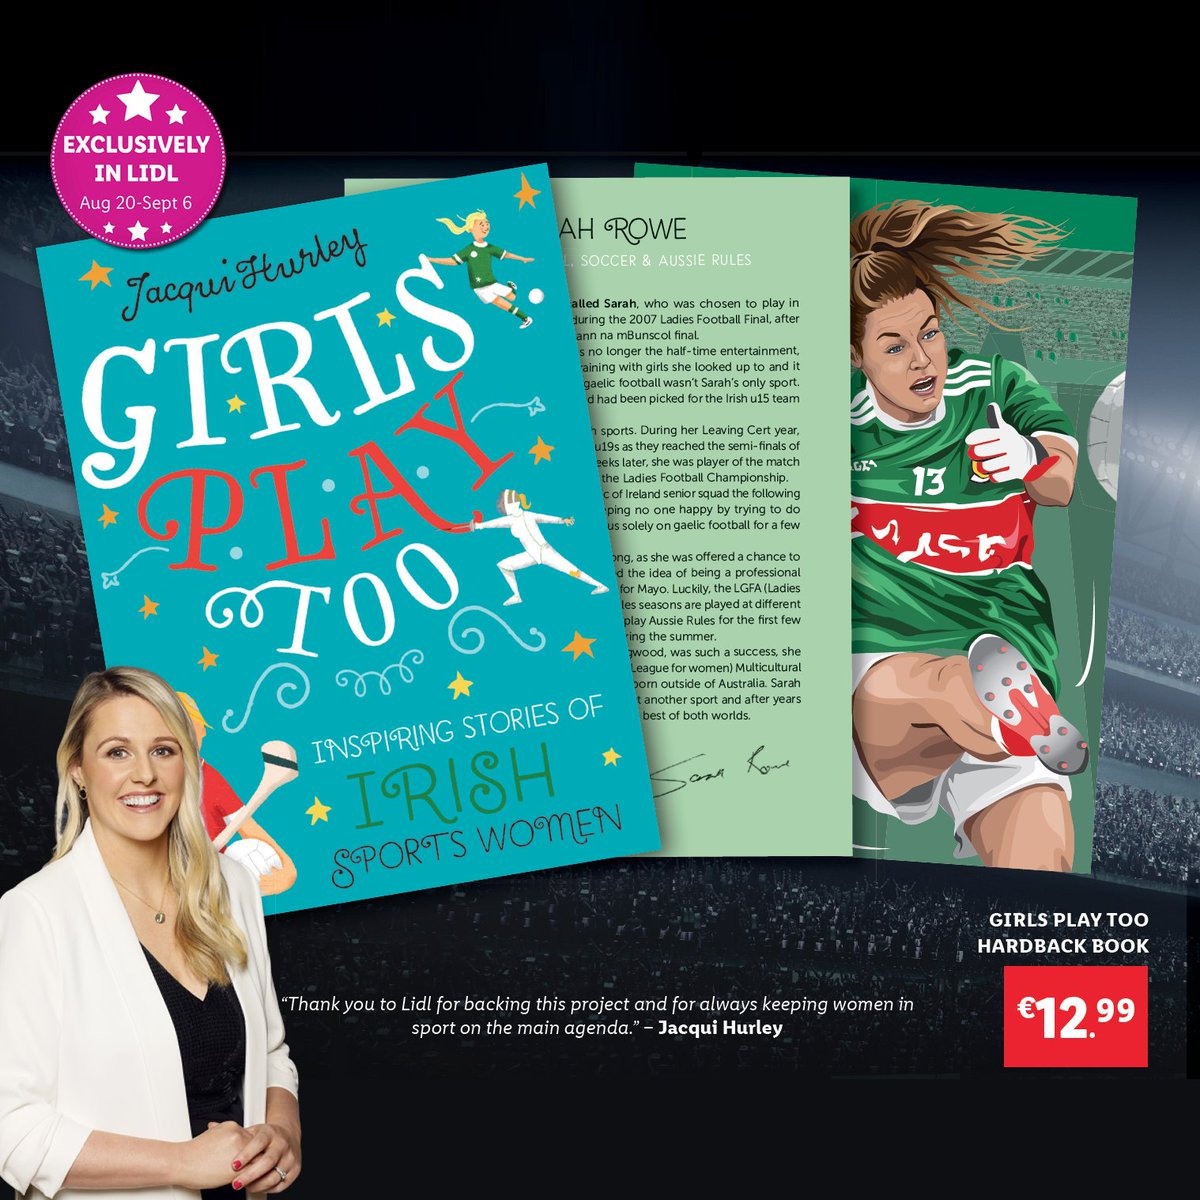 We're delighted to be stocking @JacquiHurley's book Girls Play Too: Inspiring Stories of Irish Sportswomen, the first ever collection of stories about Ireland’s most accomplished sportswomen - exclusively in Lidl from Aug 20th to Sept 6th! 🏐🏑⚽️

@LadiesFootball @20x20_ie